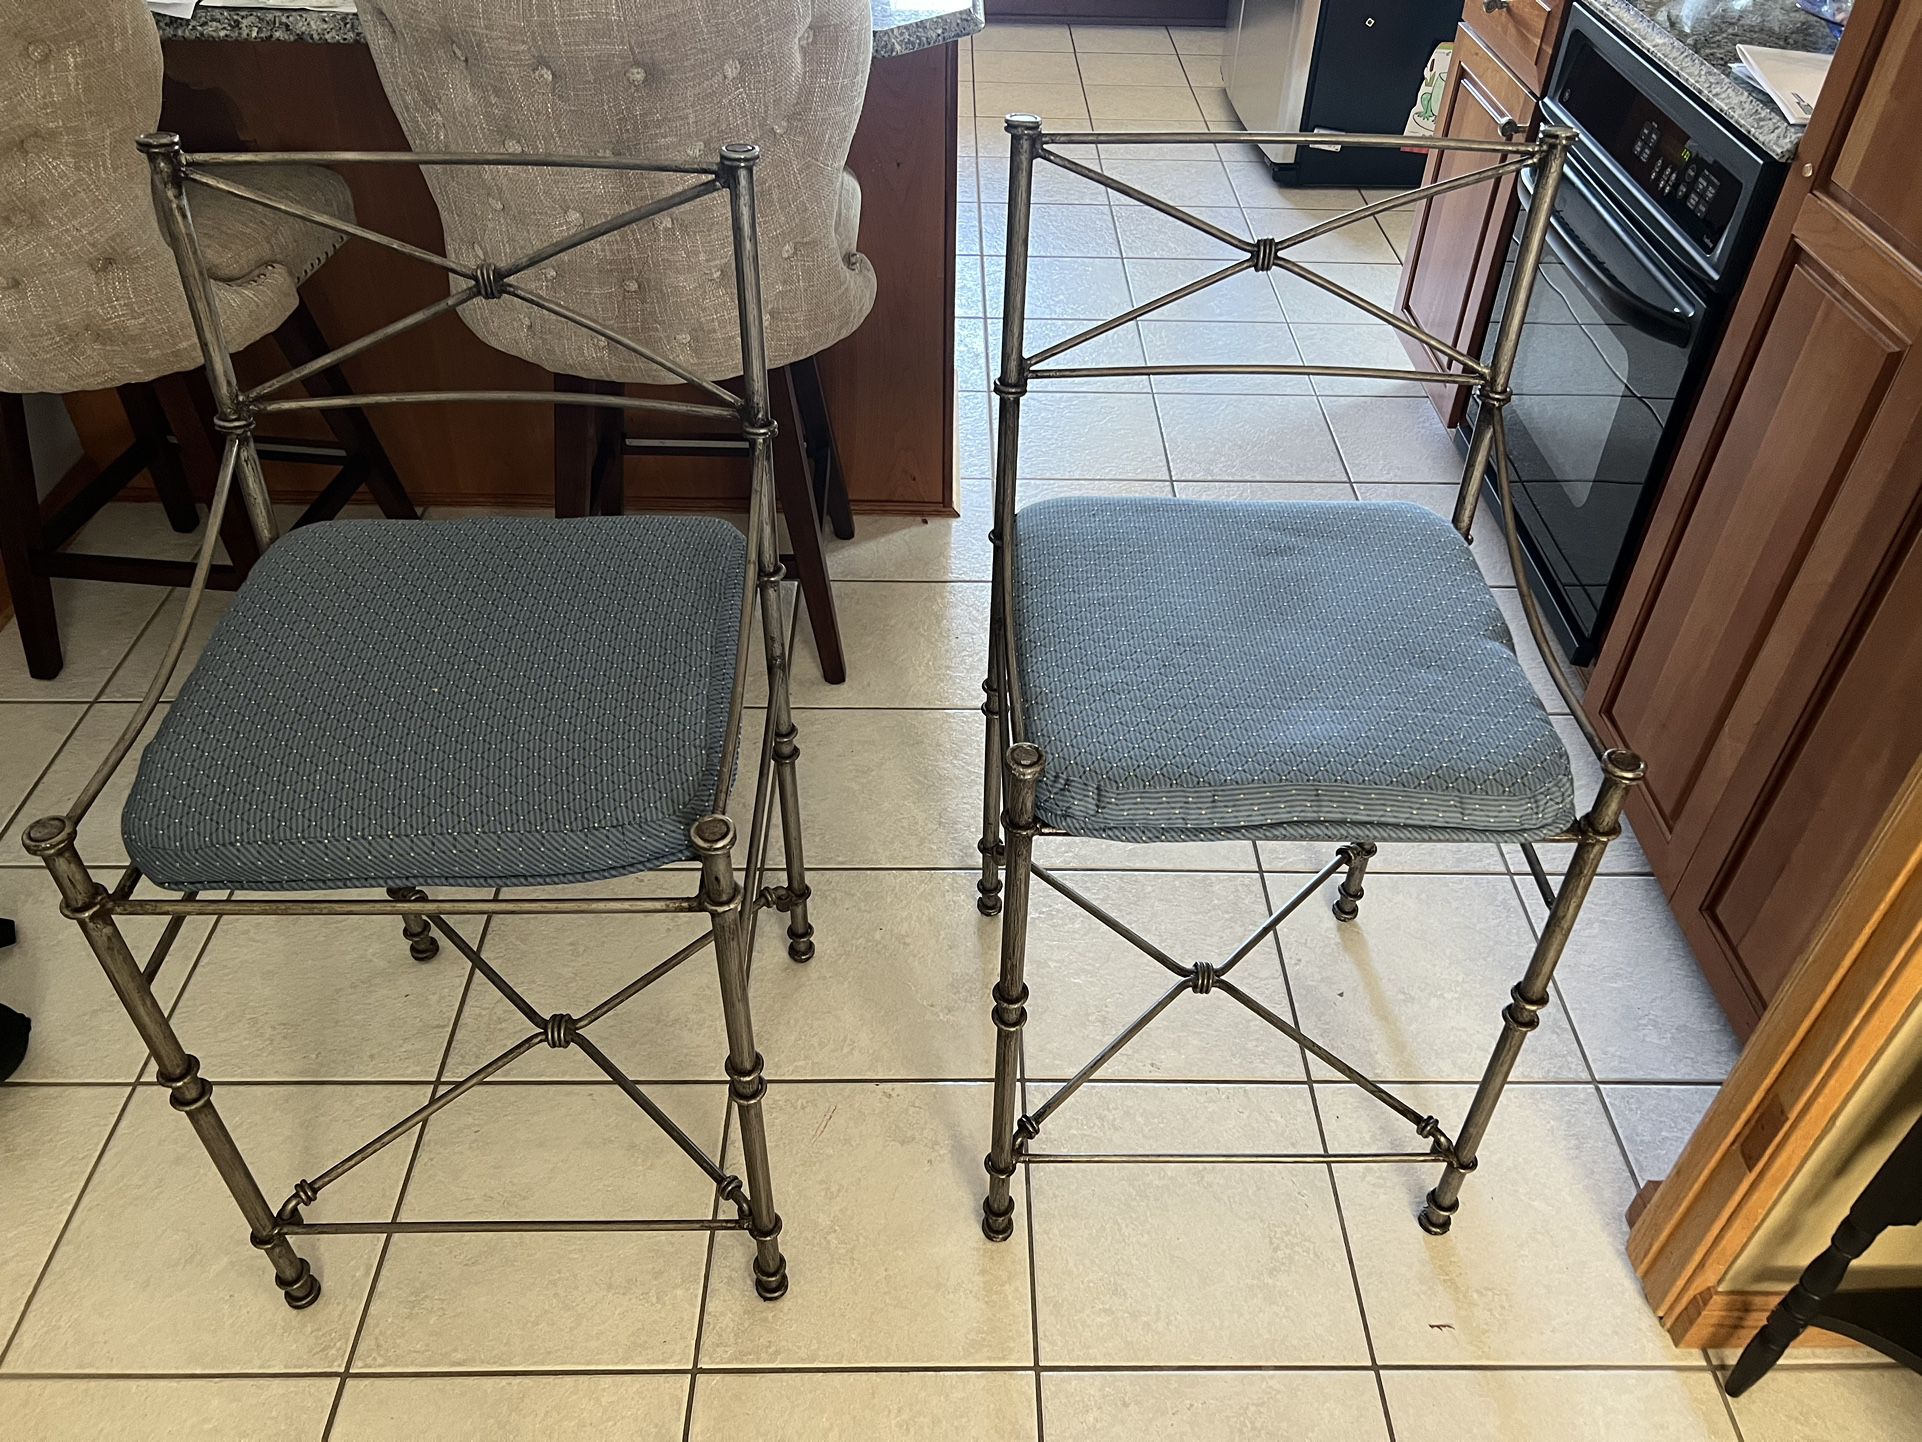 Pair Of Counter Height Stools